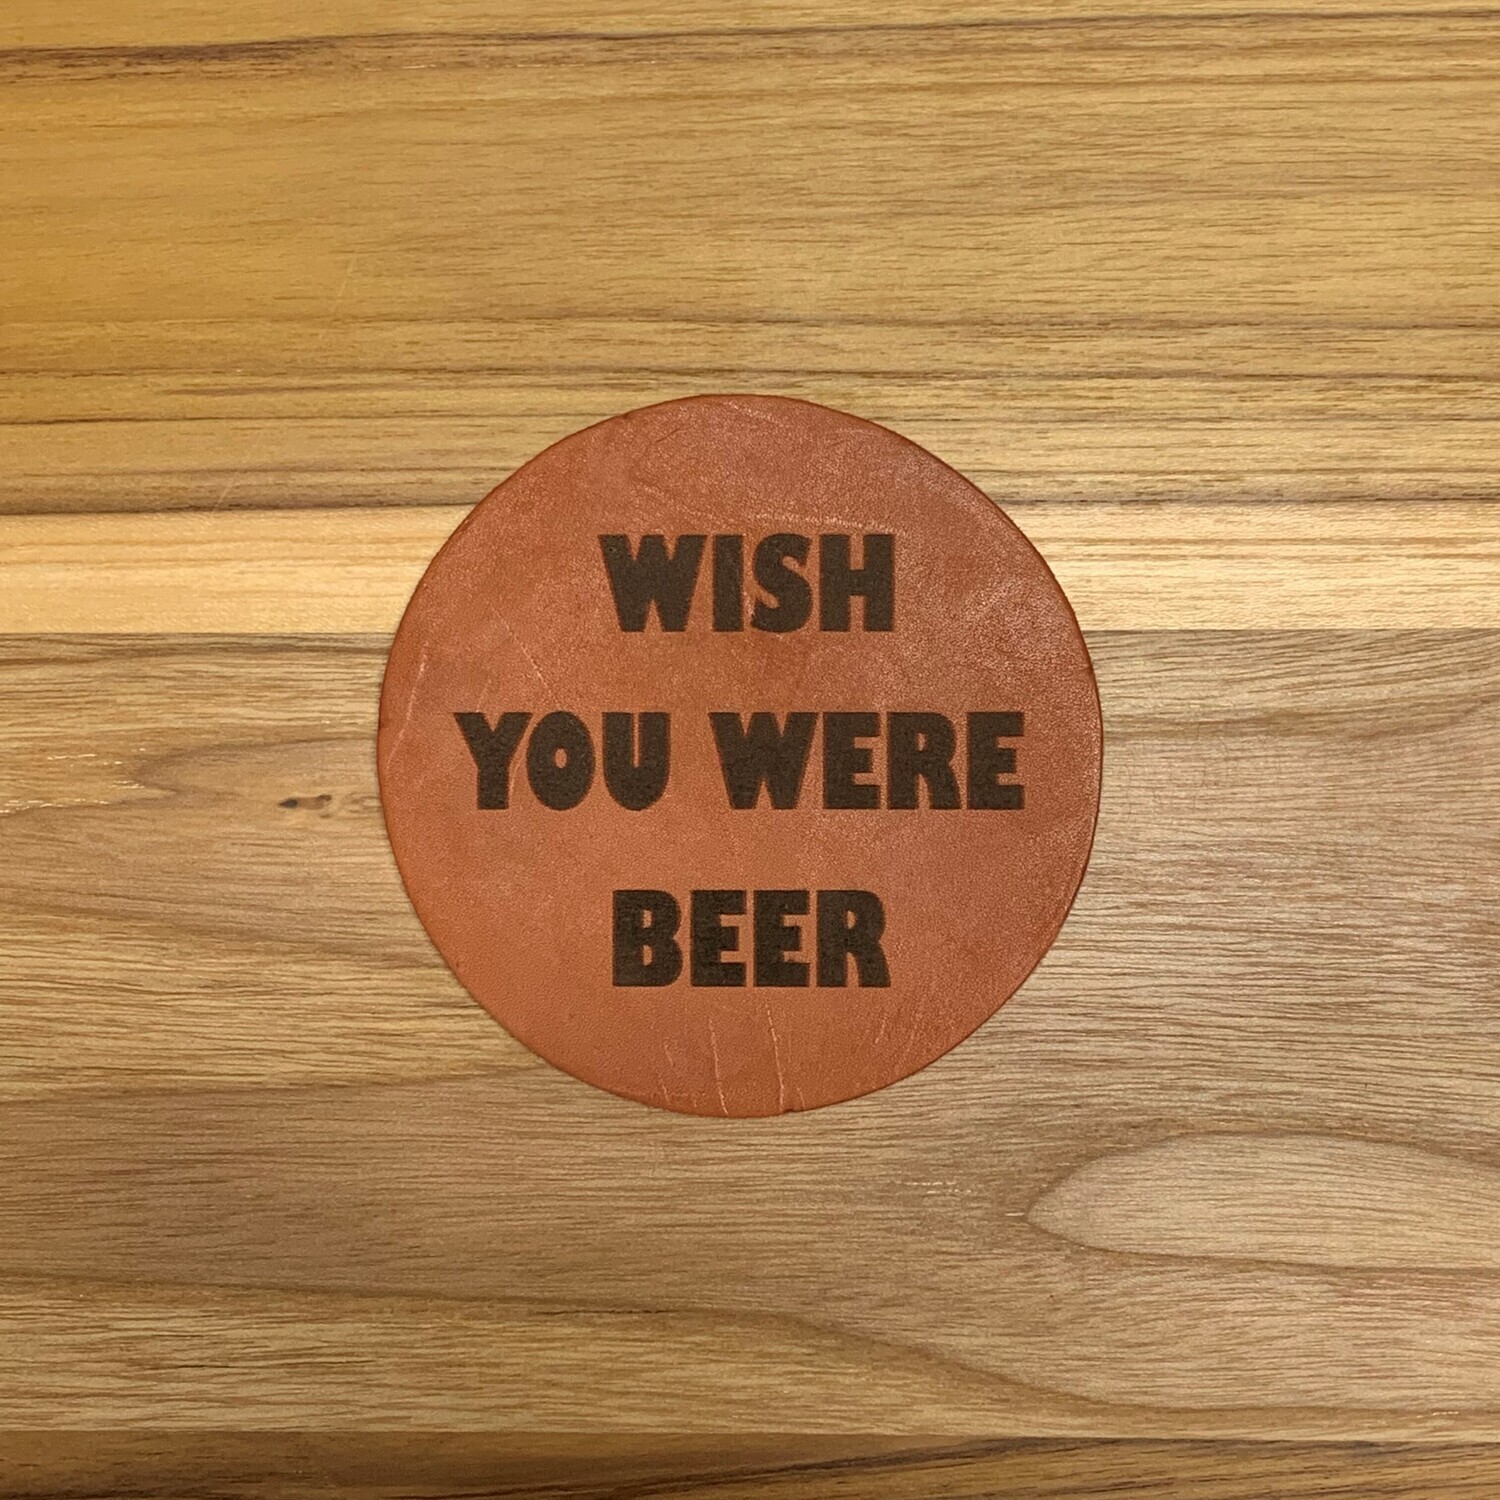 Wish You Were Beer - Leather Coasters